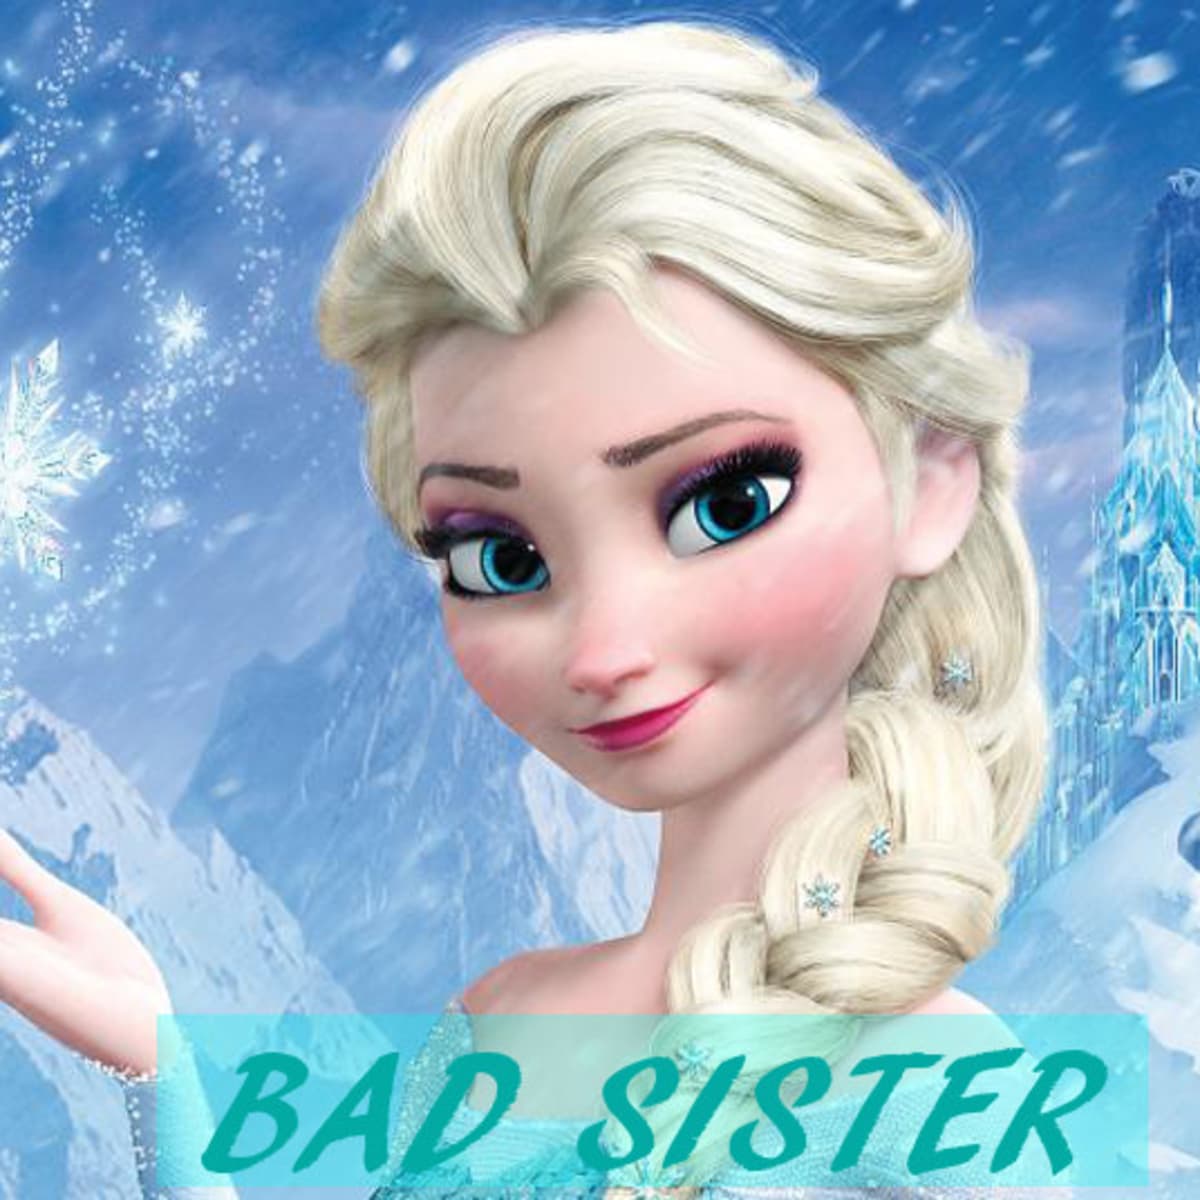 Is Elsa From Disney's Frozen, A Bad Sister? - HubPages